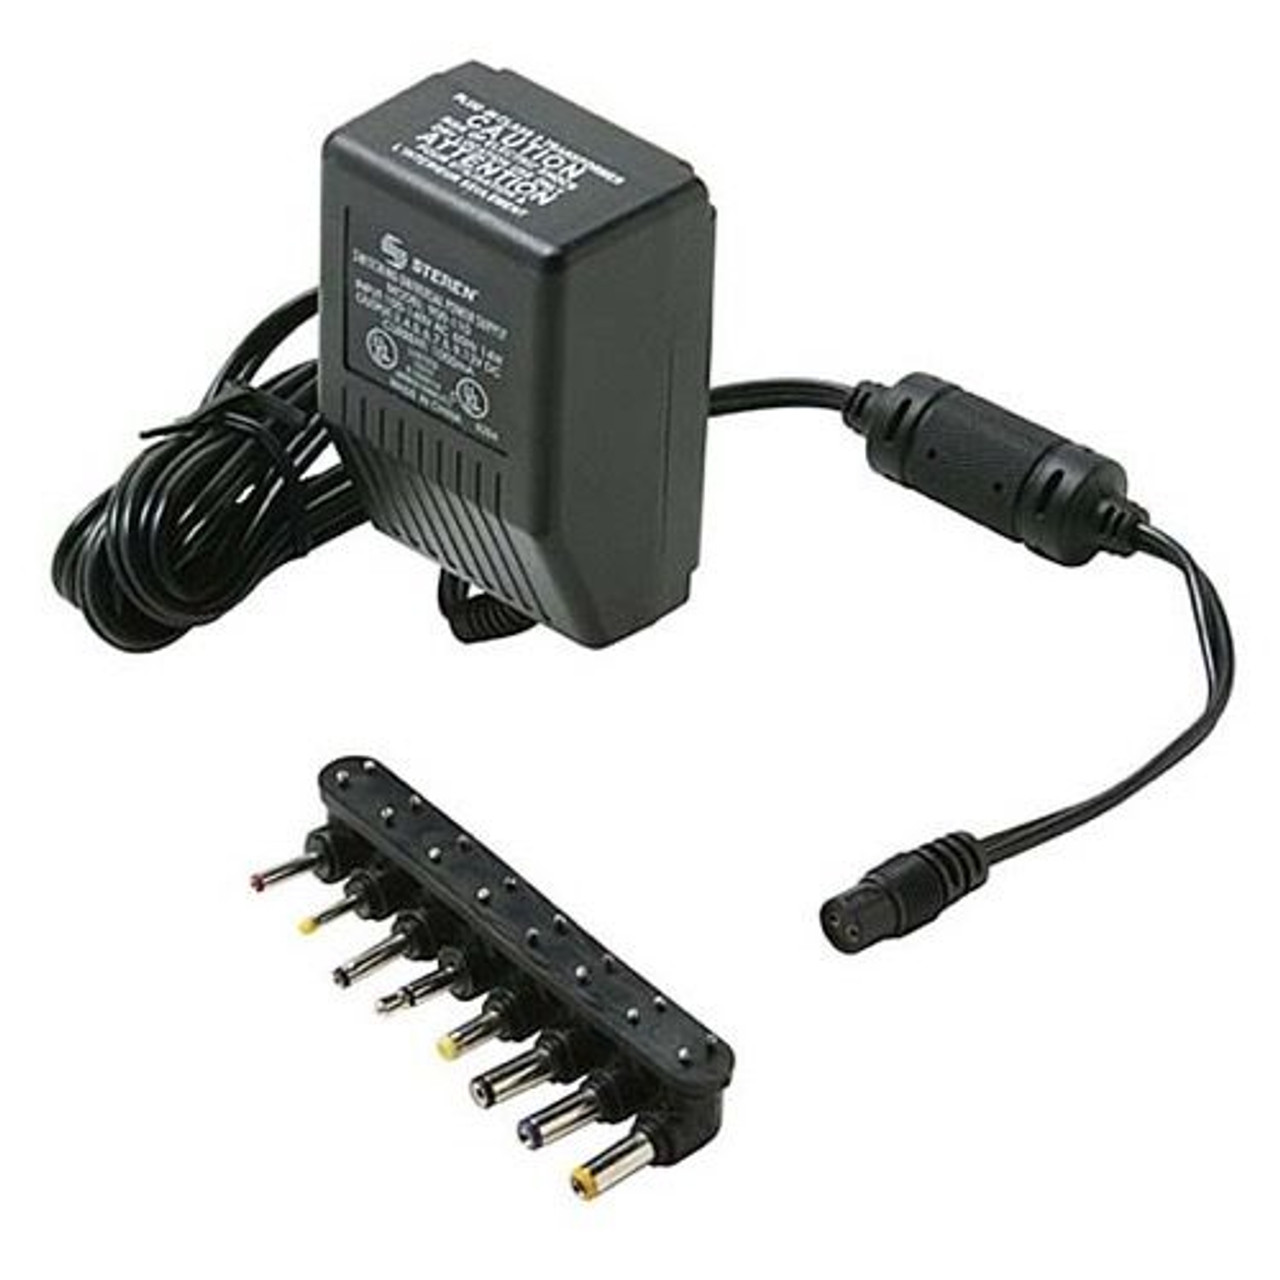 Steren 900-117 Universal Supply Adapter 1700 mA AC/DC with 6 Detachable Plugs Converter Volt UL Transformer AC DC Power Adapter Supply 110 VAC 50-60 Hz Adapter with Switchable Voltage Outputs 3, 4.5, 6, 7.5, 9, 12 VDC, Part # 900117